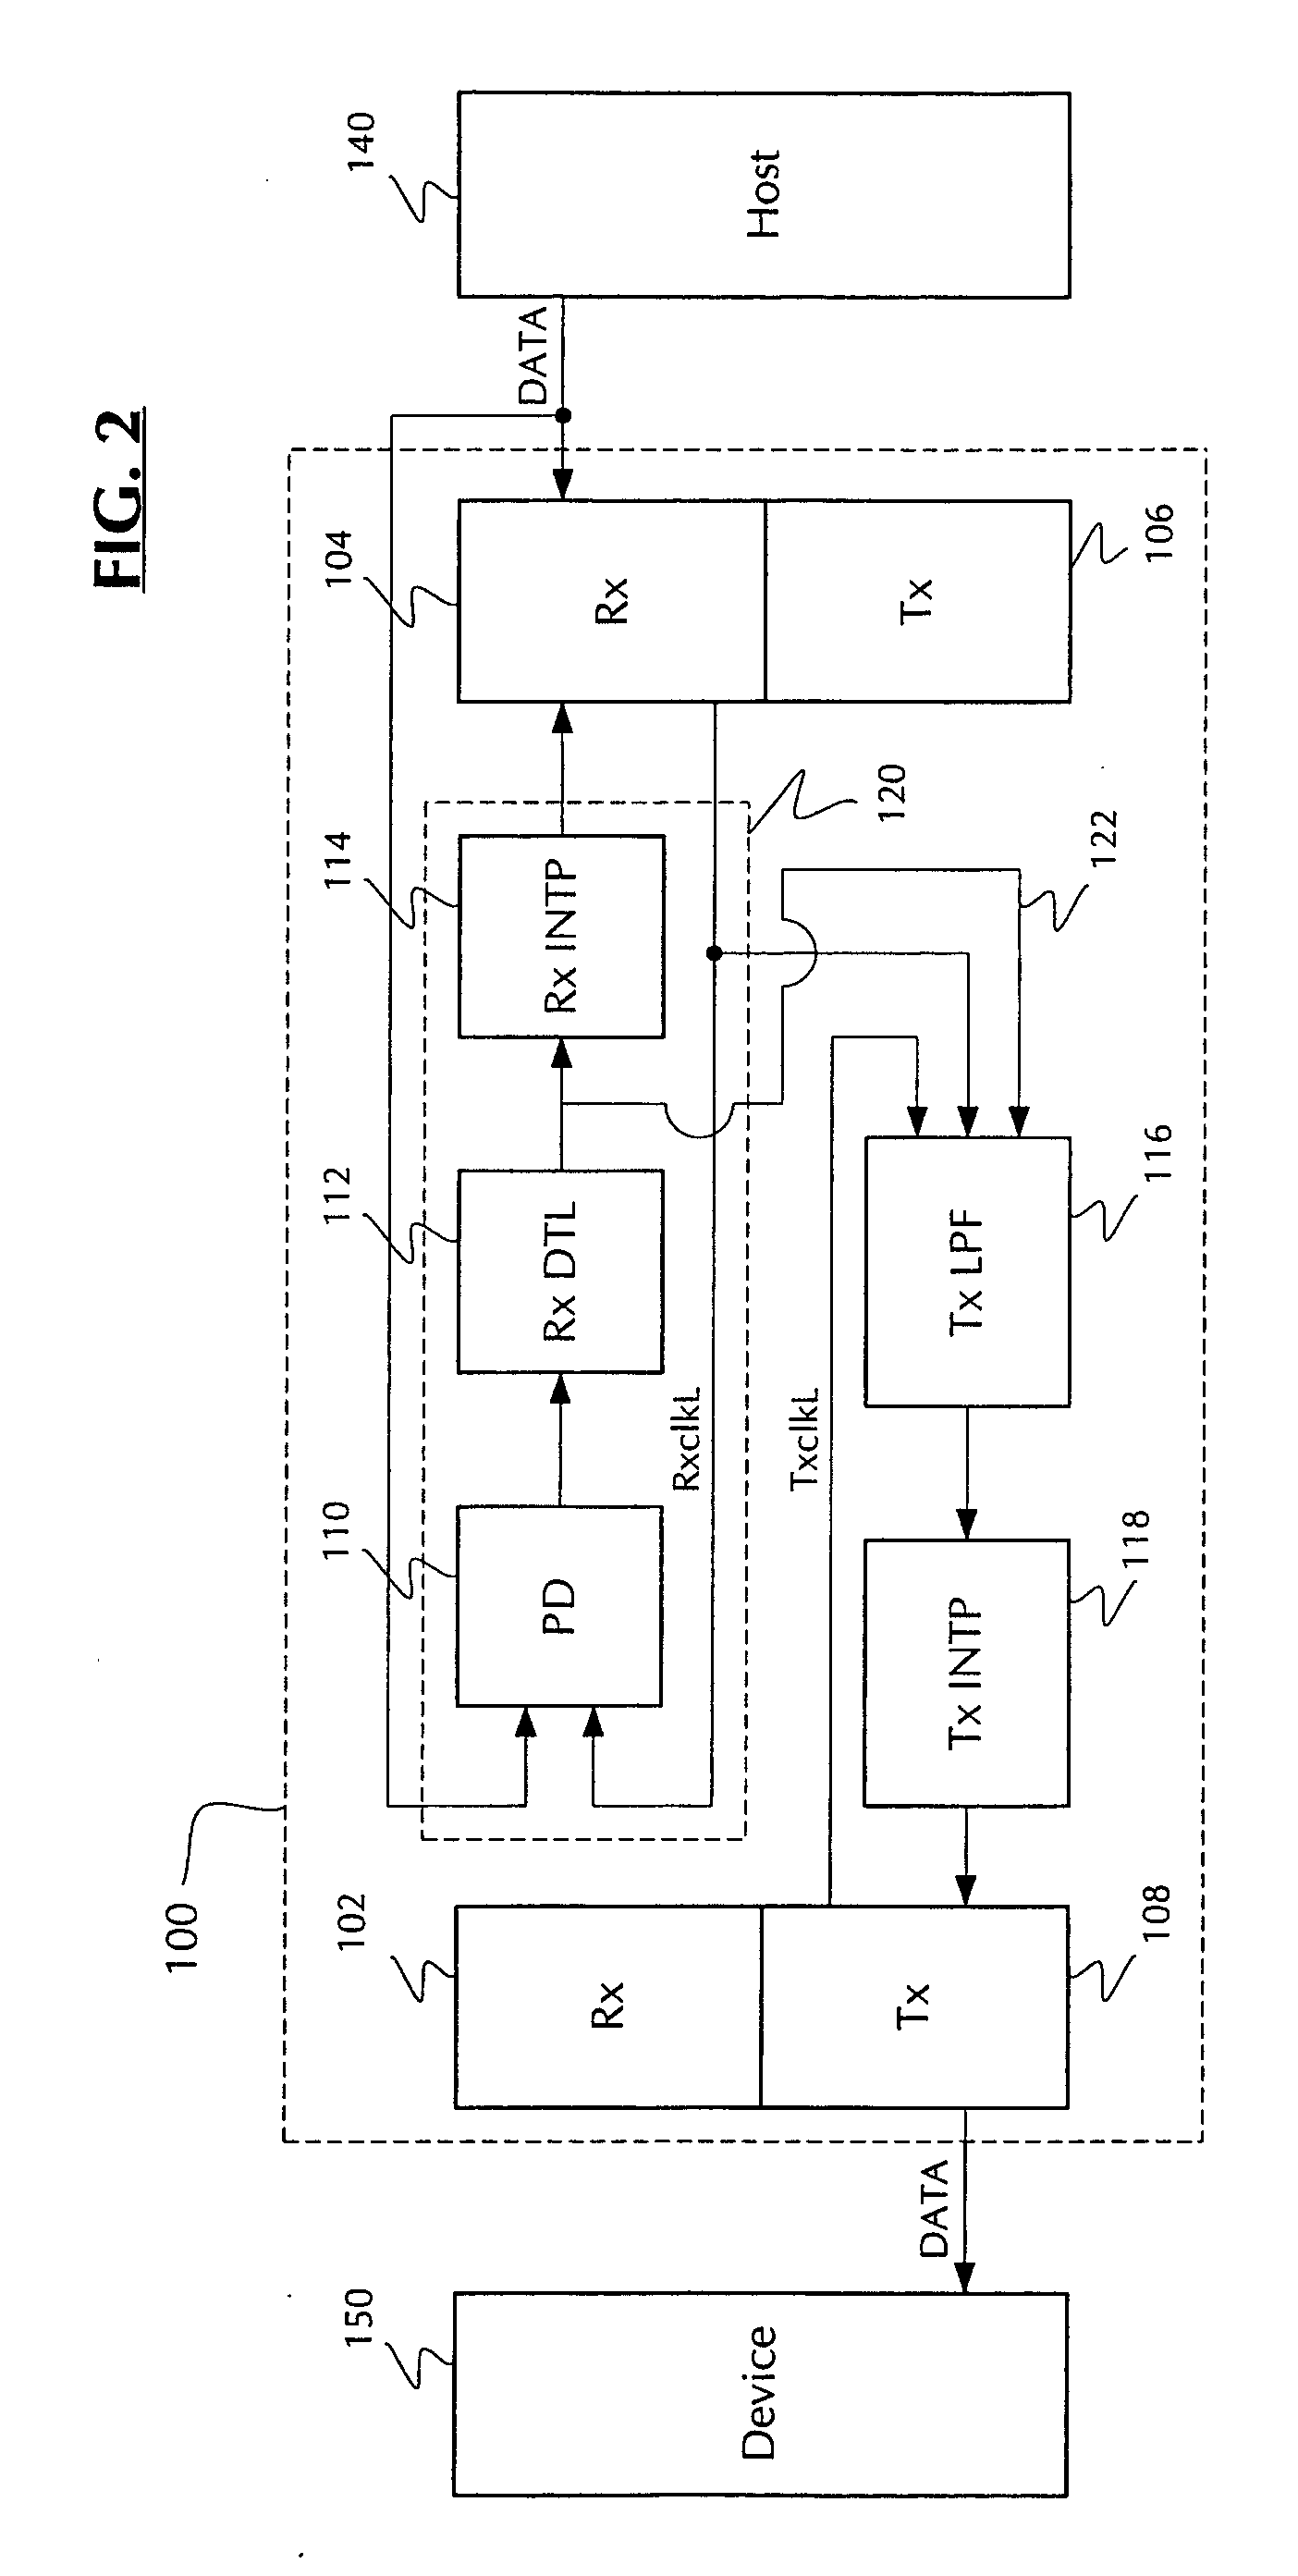 Architectures, circuits, systems and methods for reducing latency in data communications